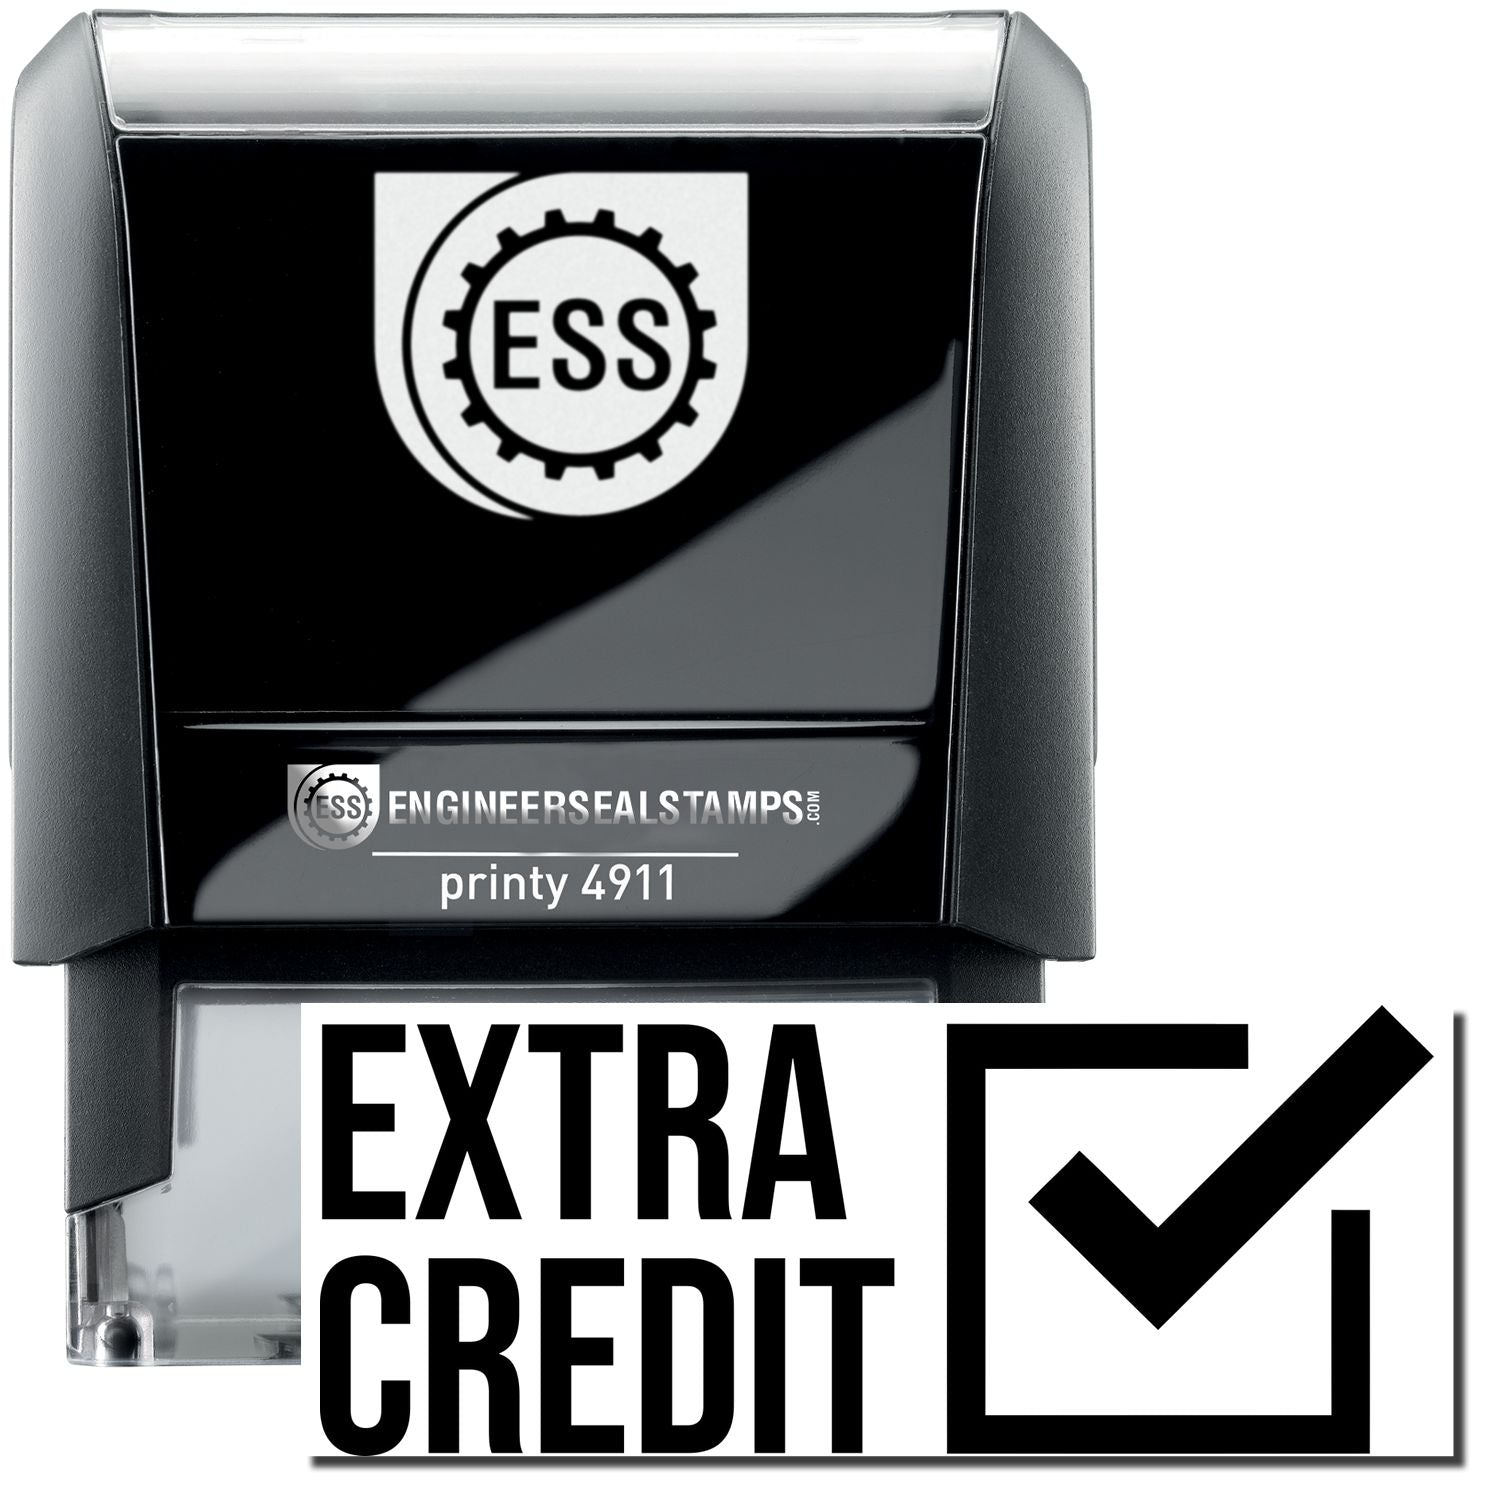 A self-inking stamp with a stamped image showing how the text "EXTRA CREDIT" (in bold font with a checked box on the right side) is displayed after stamping.